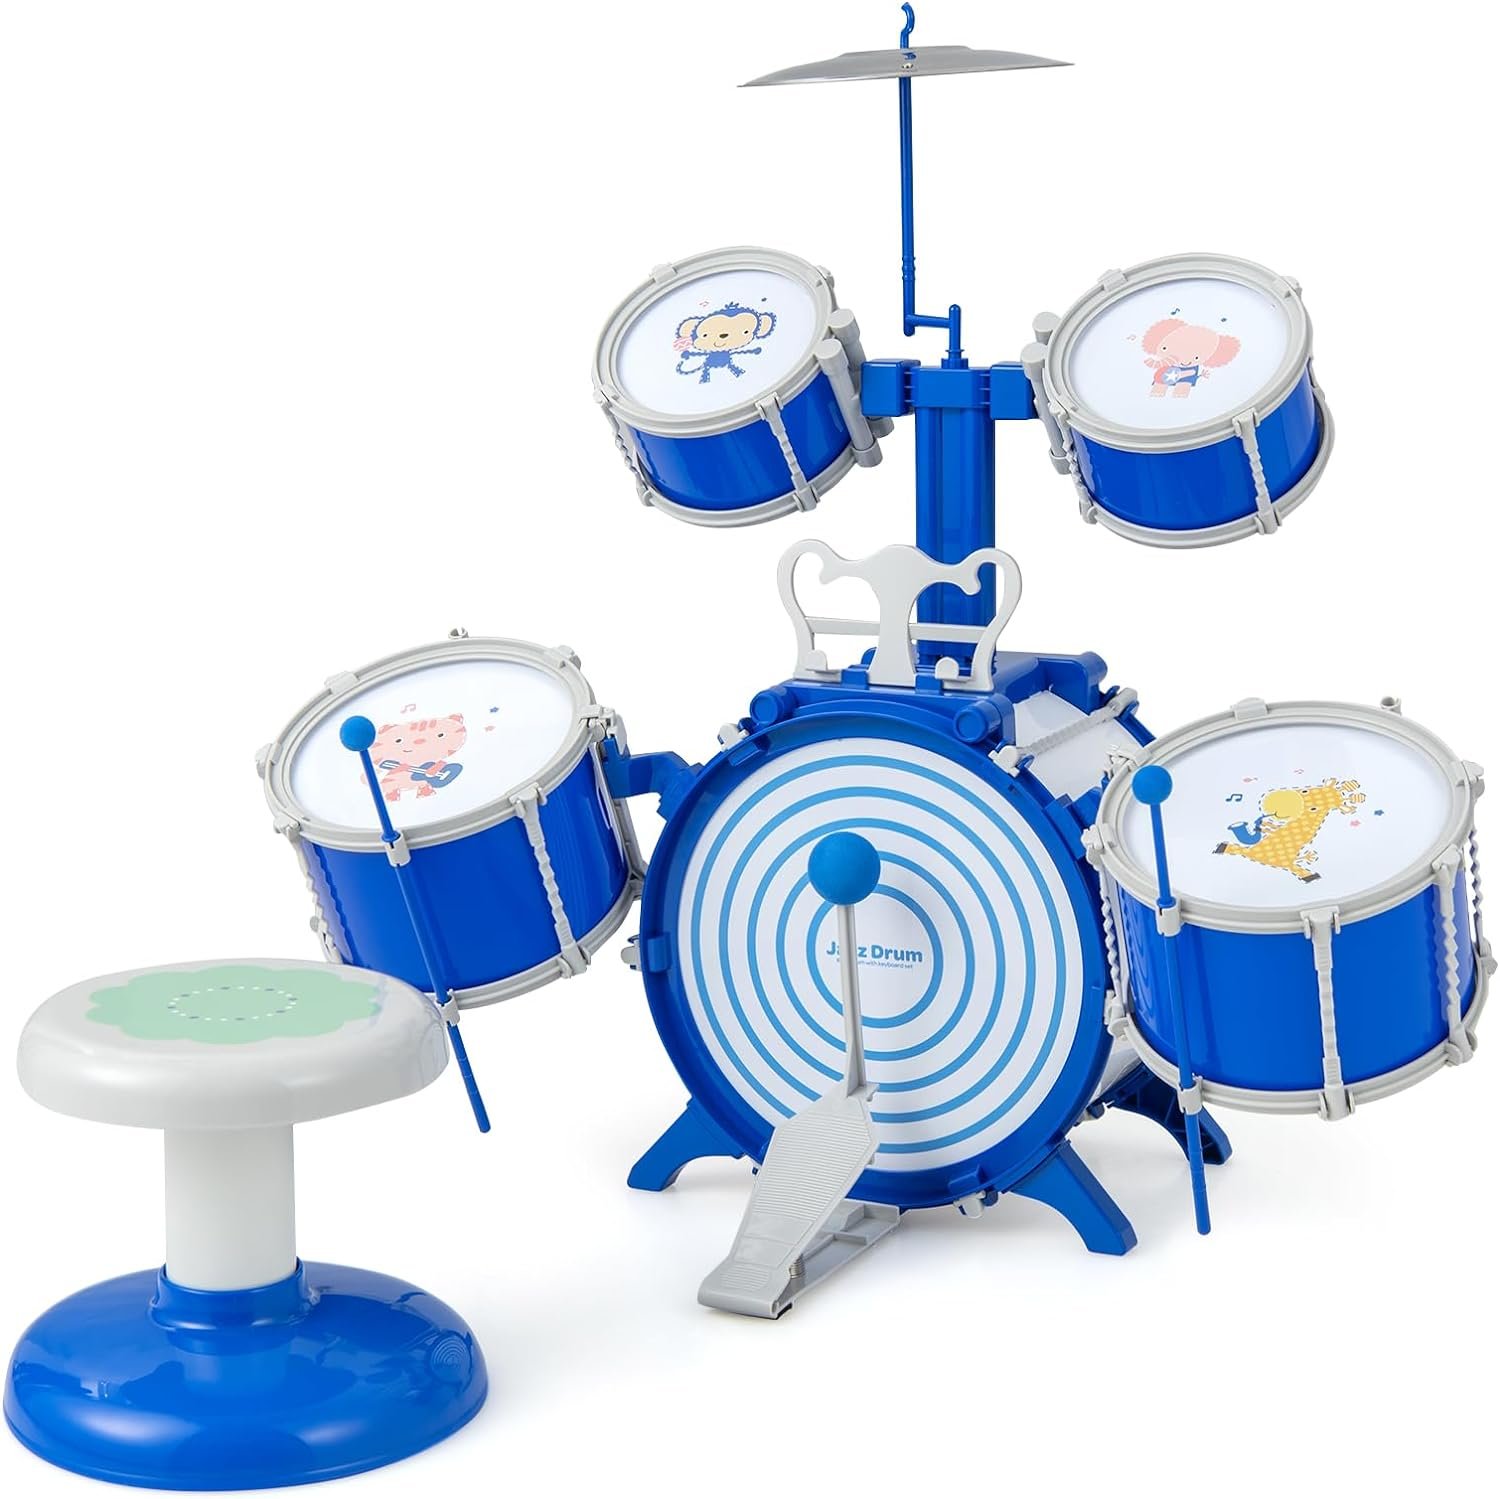 HONEY JOY Kids Drum Set, Toddler Jazz Drum Kit w/ 5 Drums, Stool, Pedal, 2 Drum Sticks  Music Stand, Percussion Musical Instruments for Boys Girls Christmas Birthday, Toddler Drum Set Ages 3+